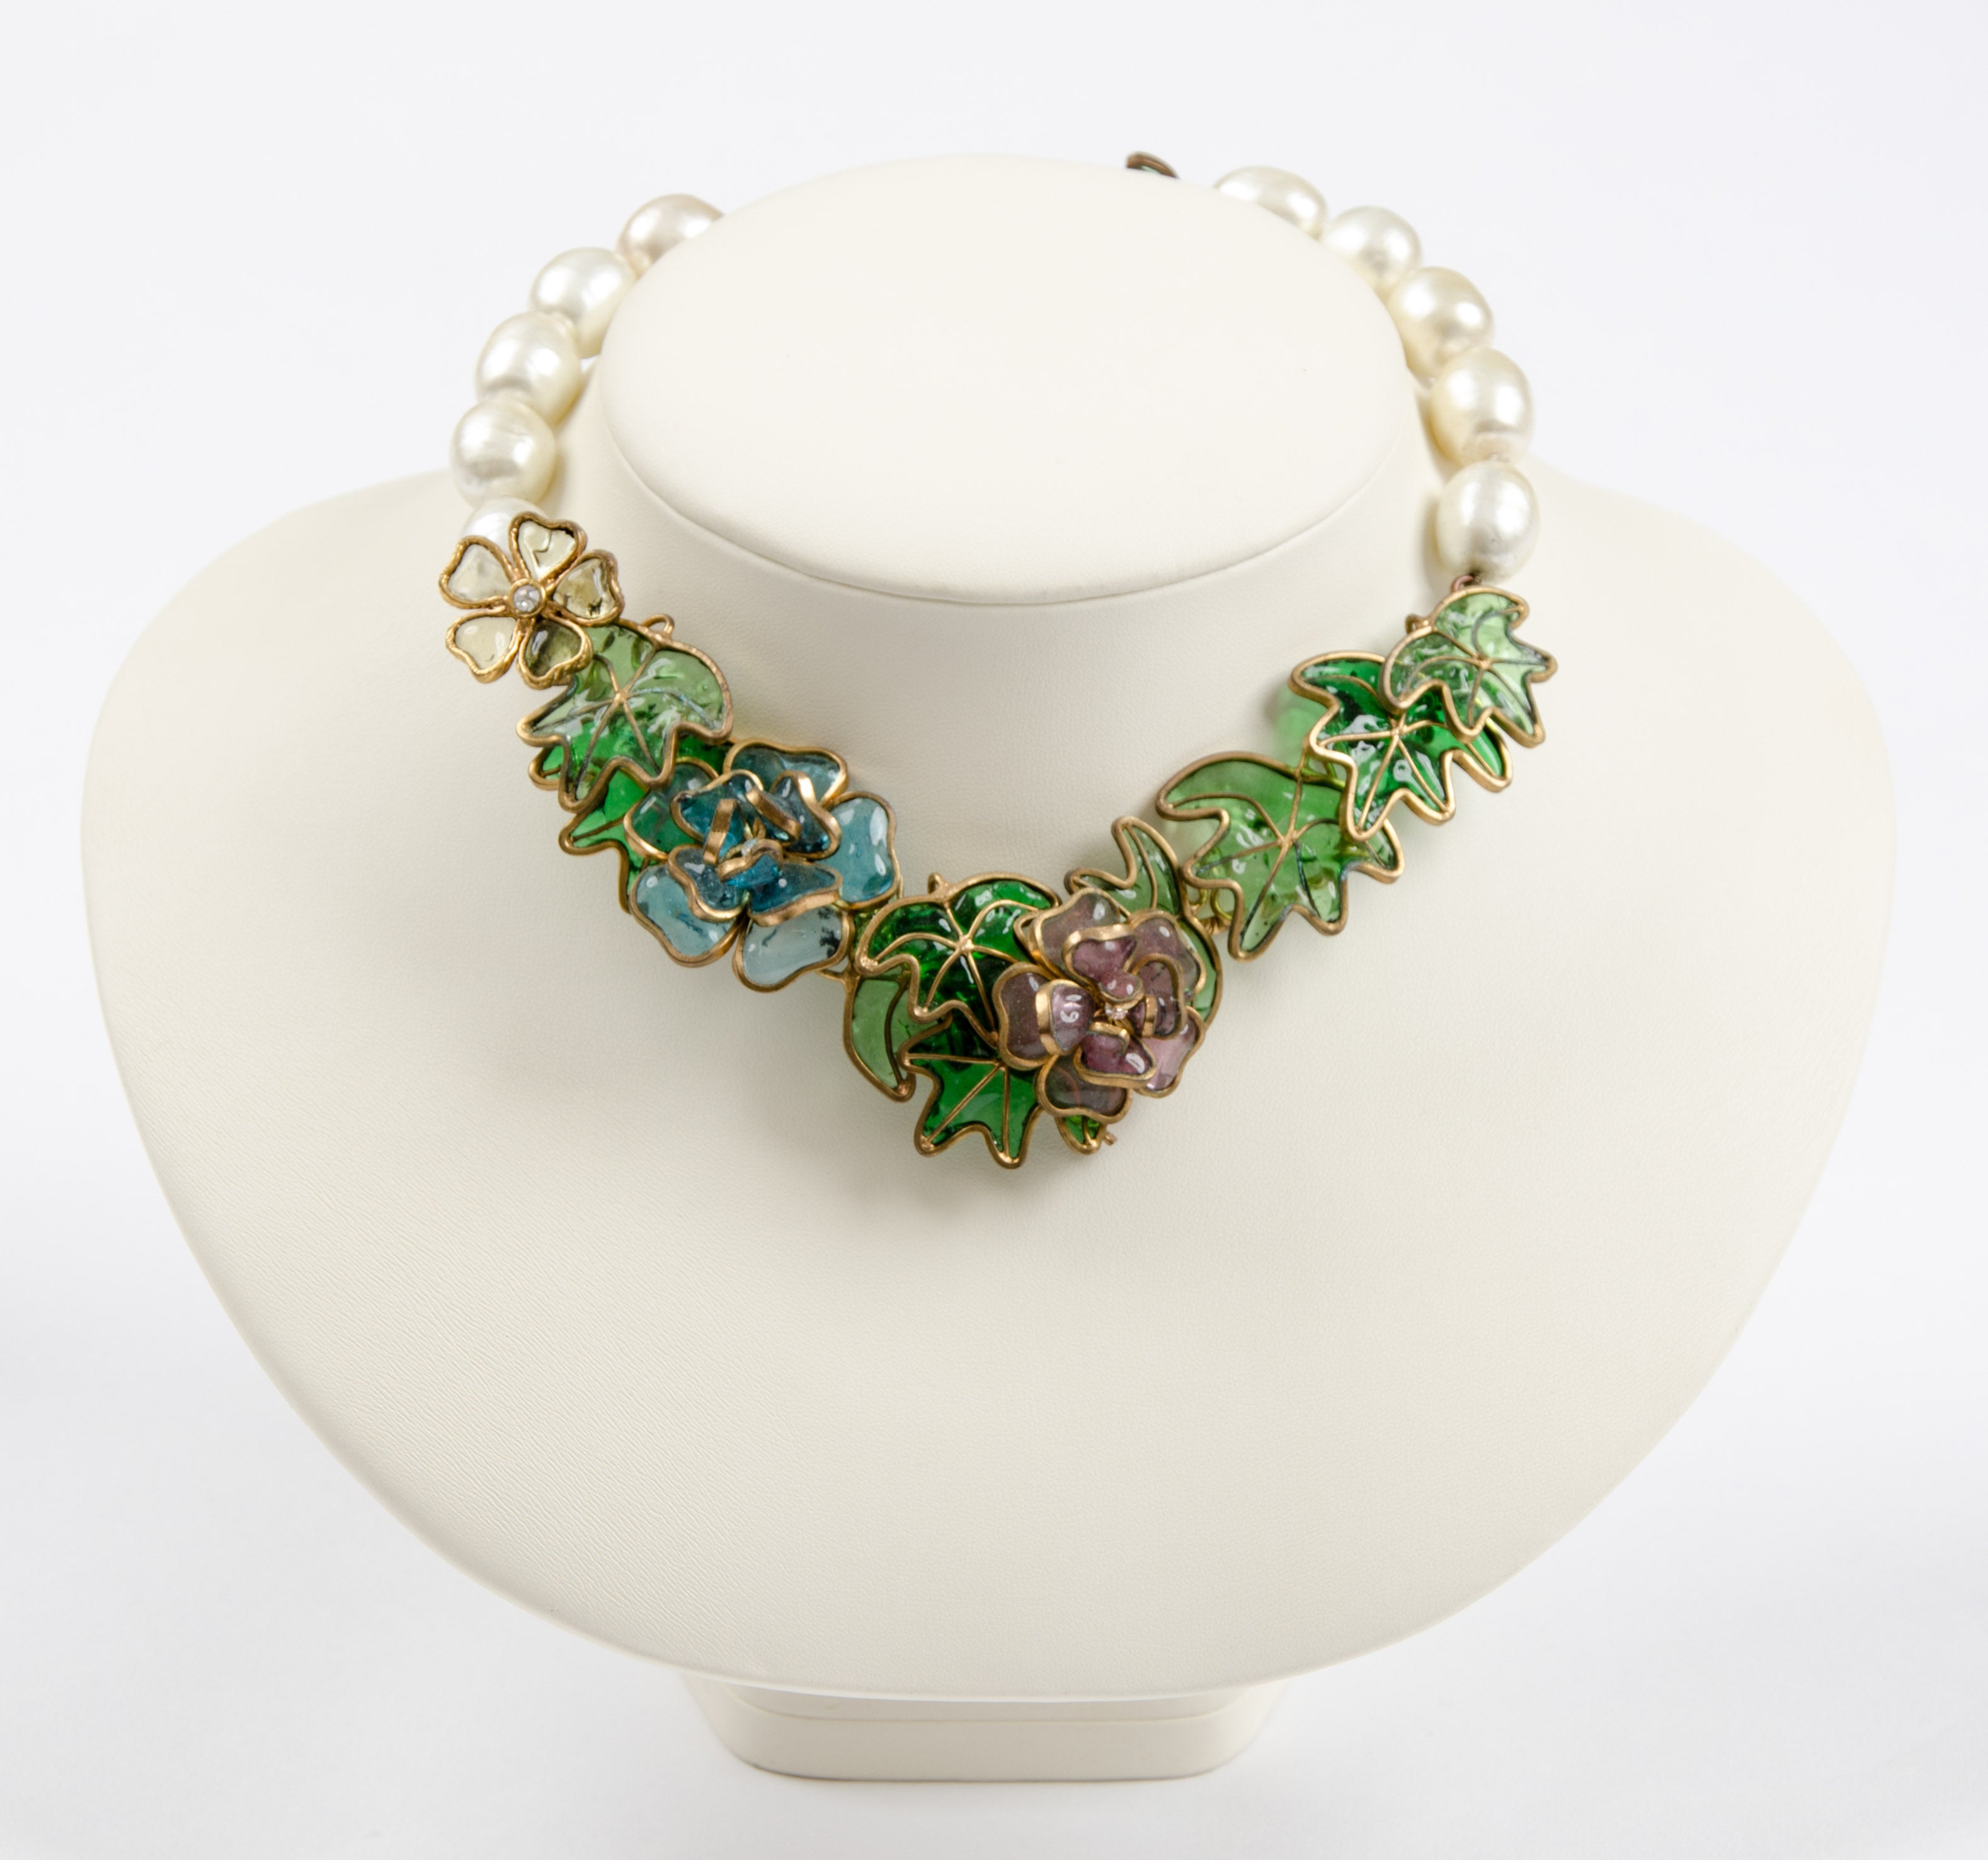 Joyous baroque fantasy necklace of leaves and flower motifs, typical work of Gripoix for Chanel in the 1980s.
Not much needs to be said about Coco Chanel, so famous and successful a designer is she!
Chanel opened her first costume jewellery